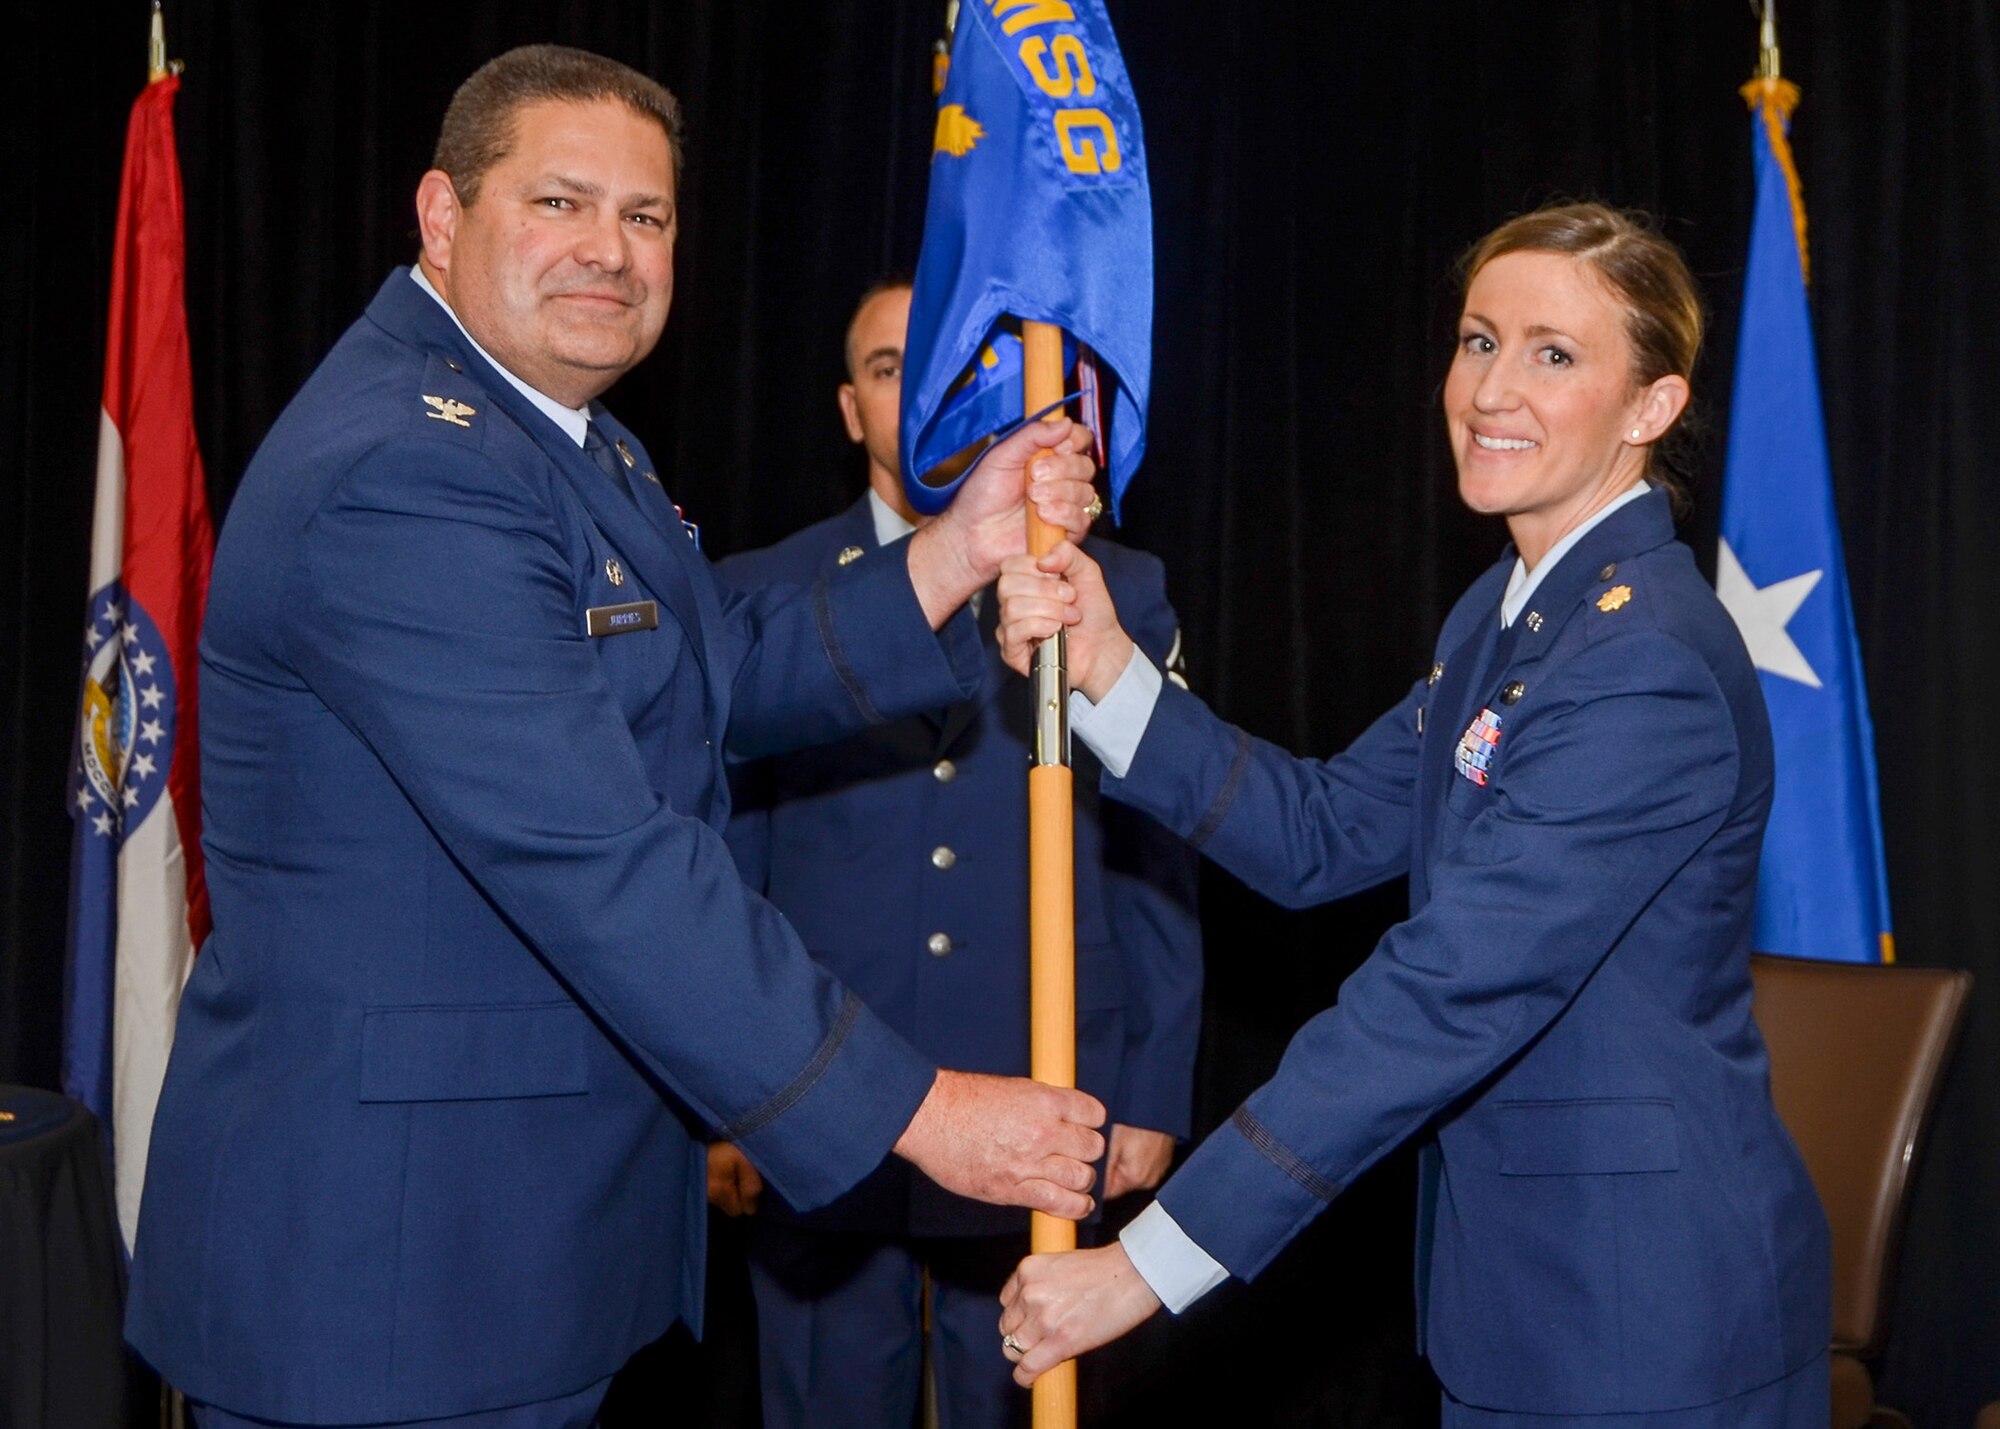 Maj. Rachel Savage receives the 131st Logistics Readiness Squadron guidon from Col. Michael Jurries, 131st Mission Support Group commander, during the assumption of command ceremony at Whiteman Air Force Base, Missouri, April 1, 2017. (U.S. Air National Guard photo by Tech. Sgt. Traci Howells)